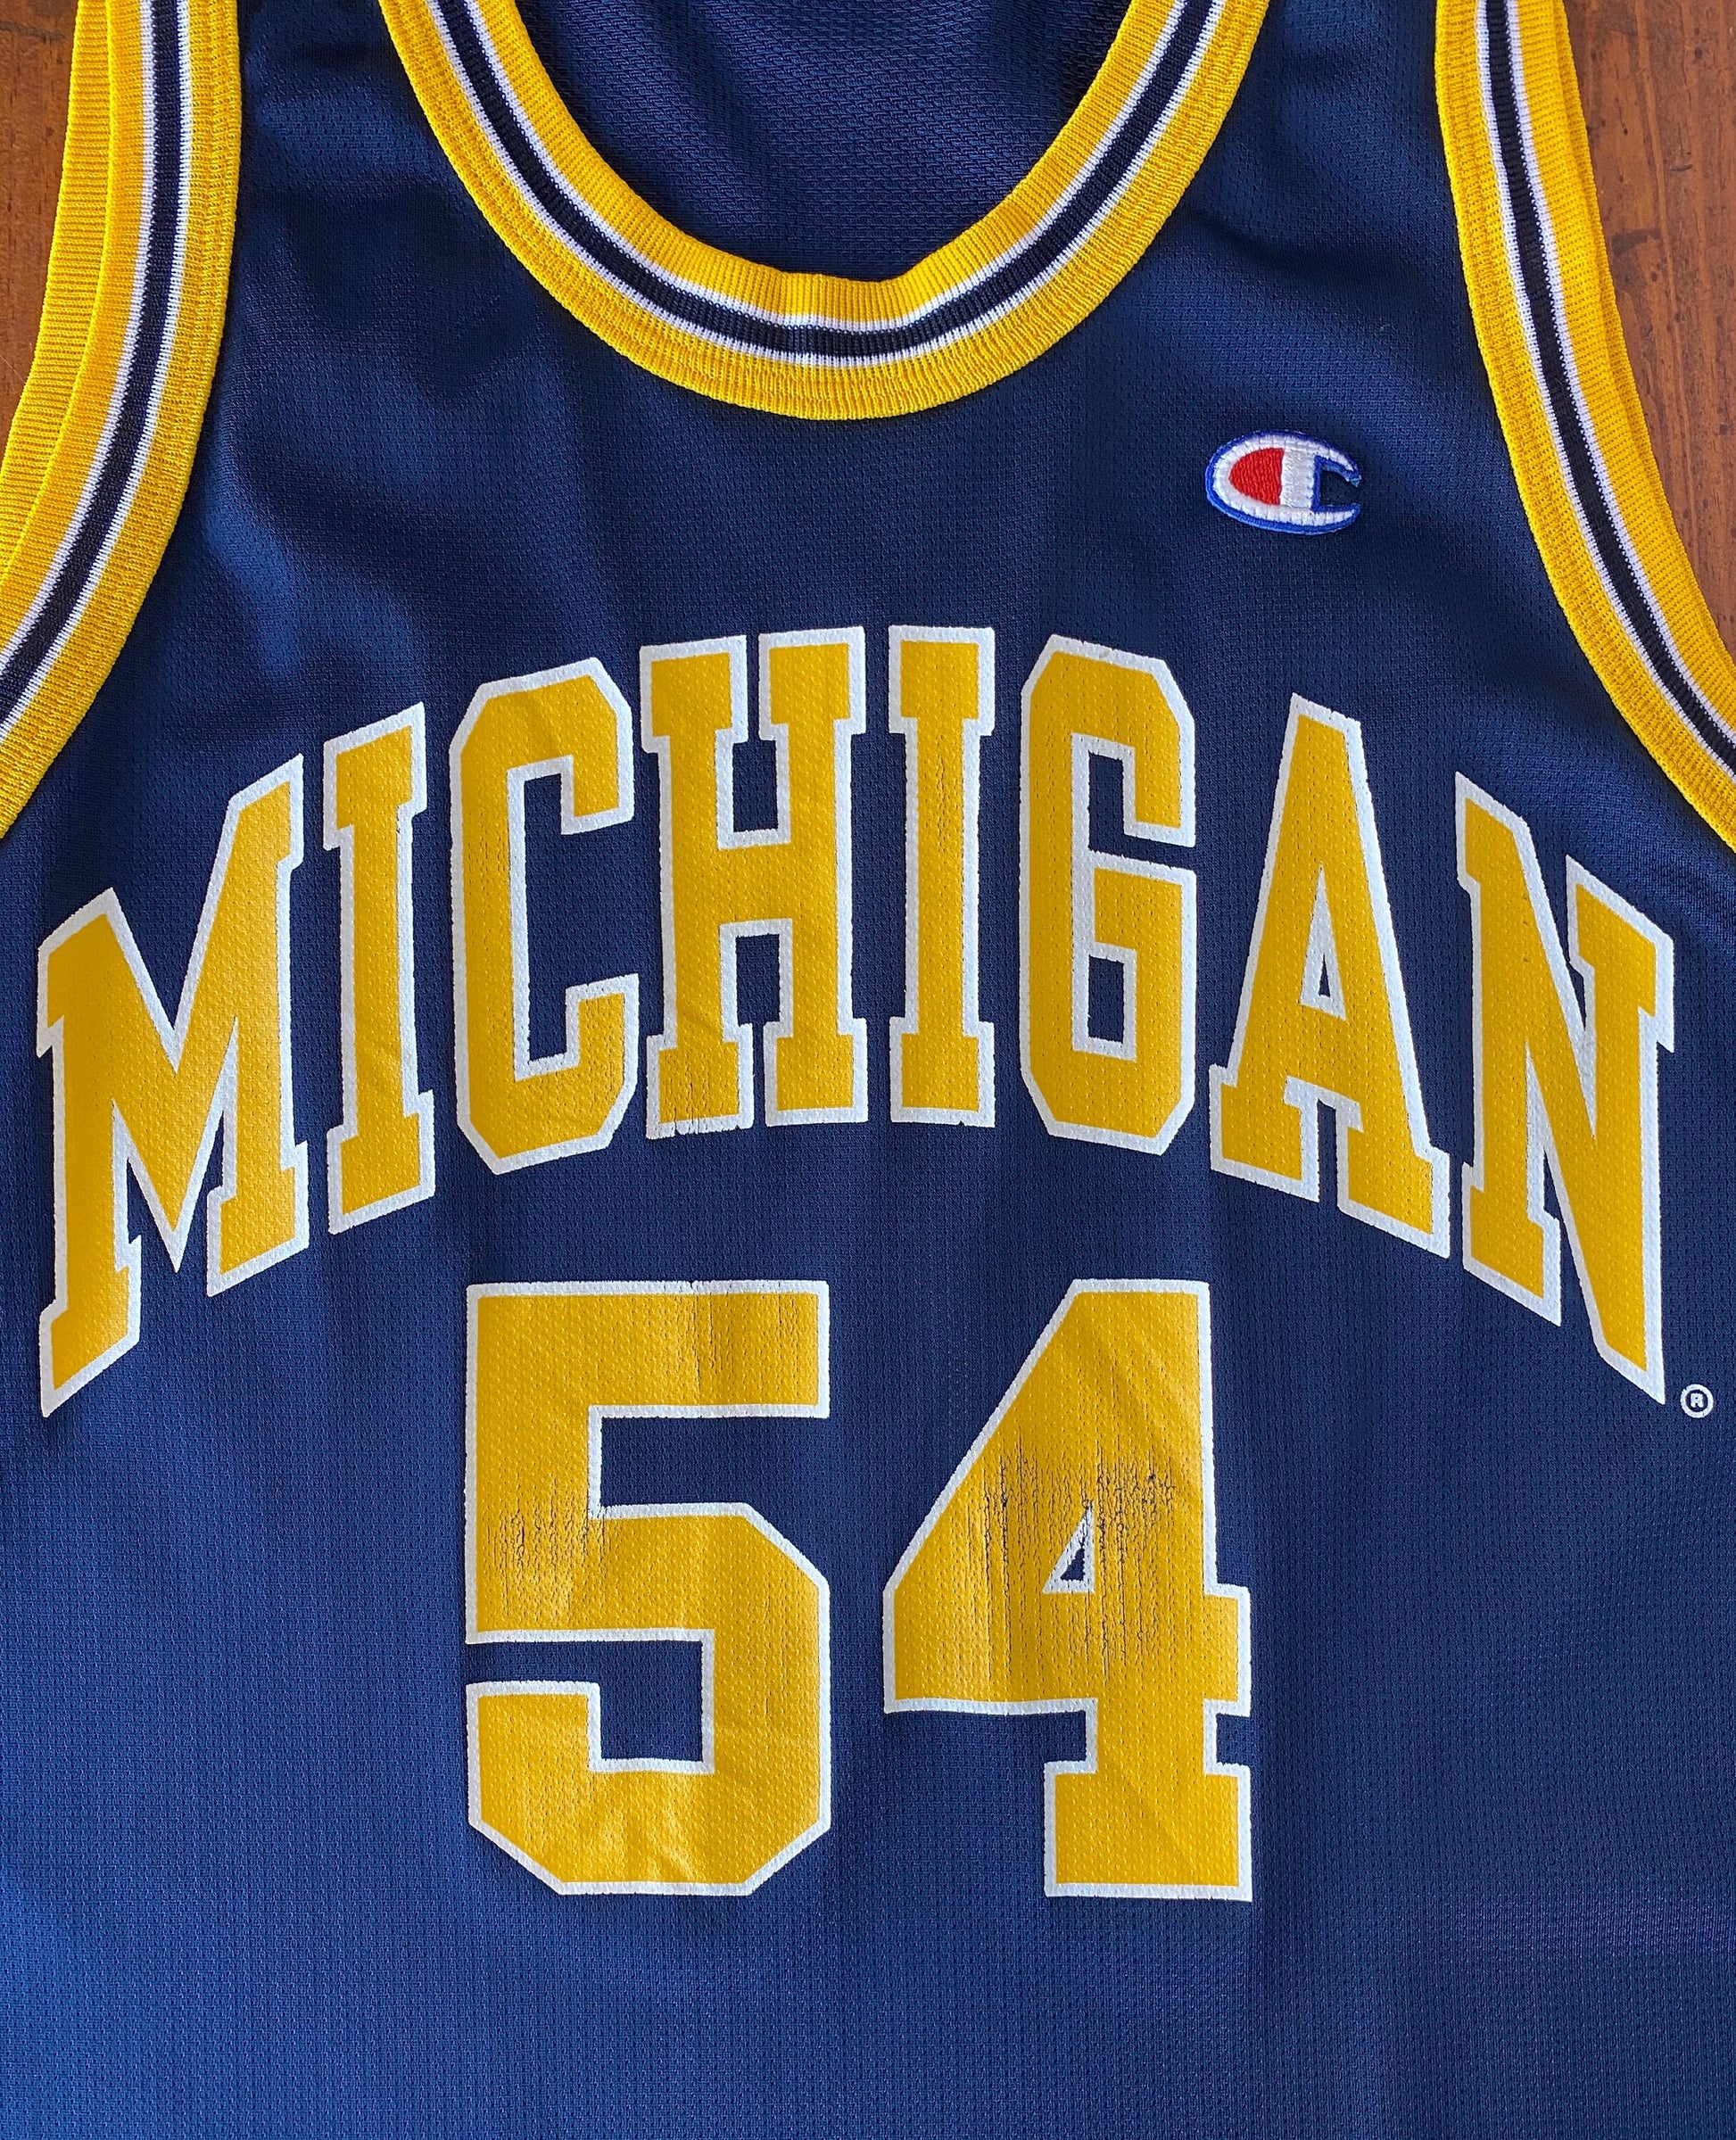 Authentic 90s Vintage NBA Jersey - #54 Michigan Wolverines - Size 40, Made in USA by Champion